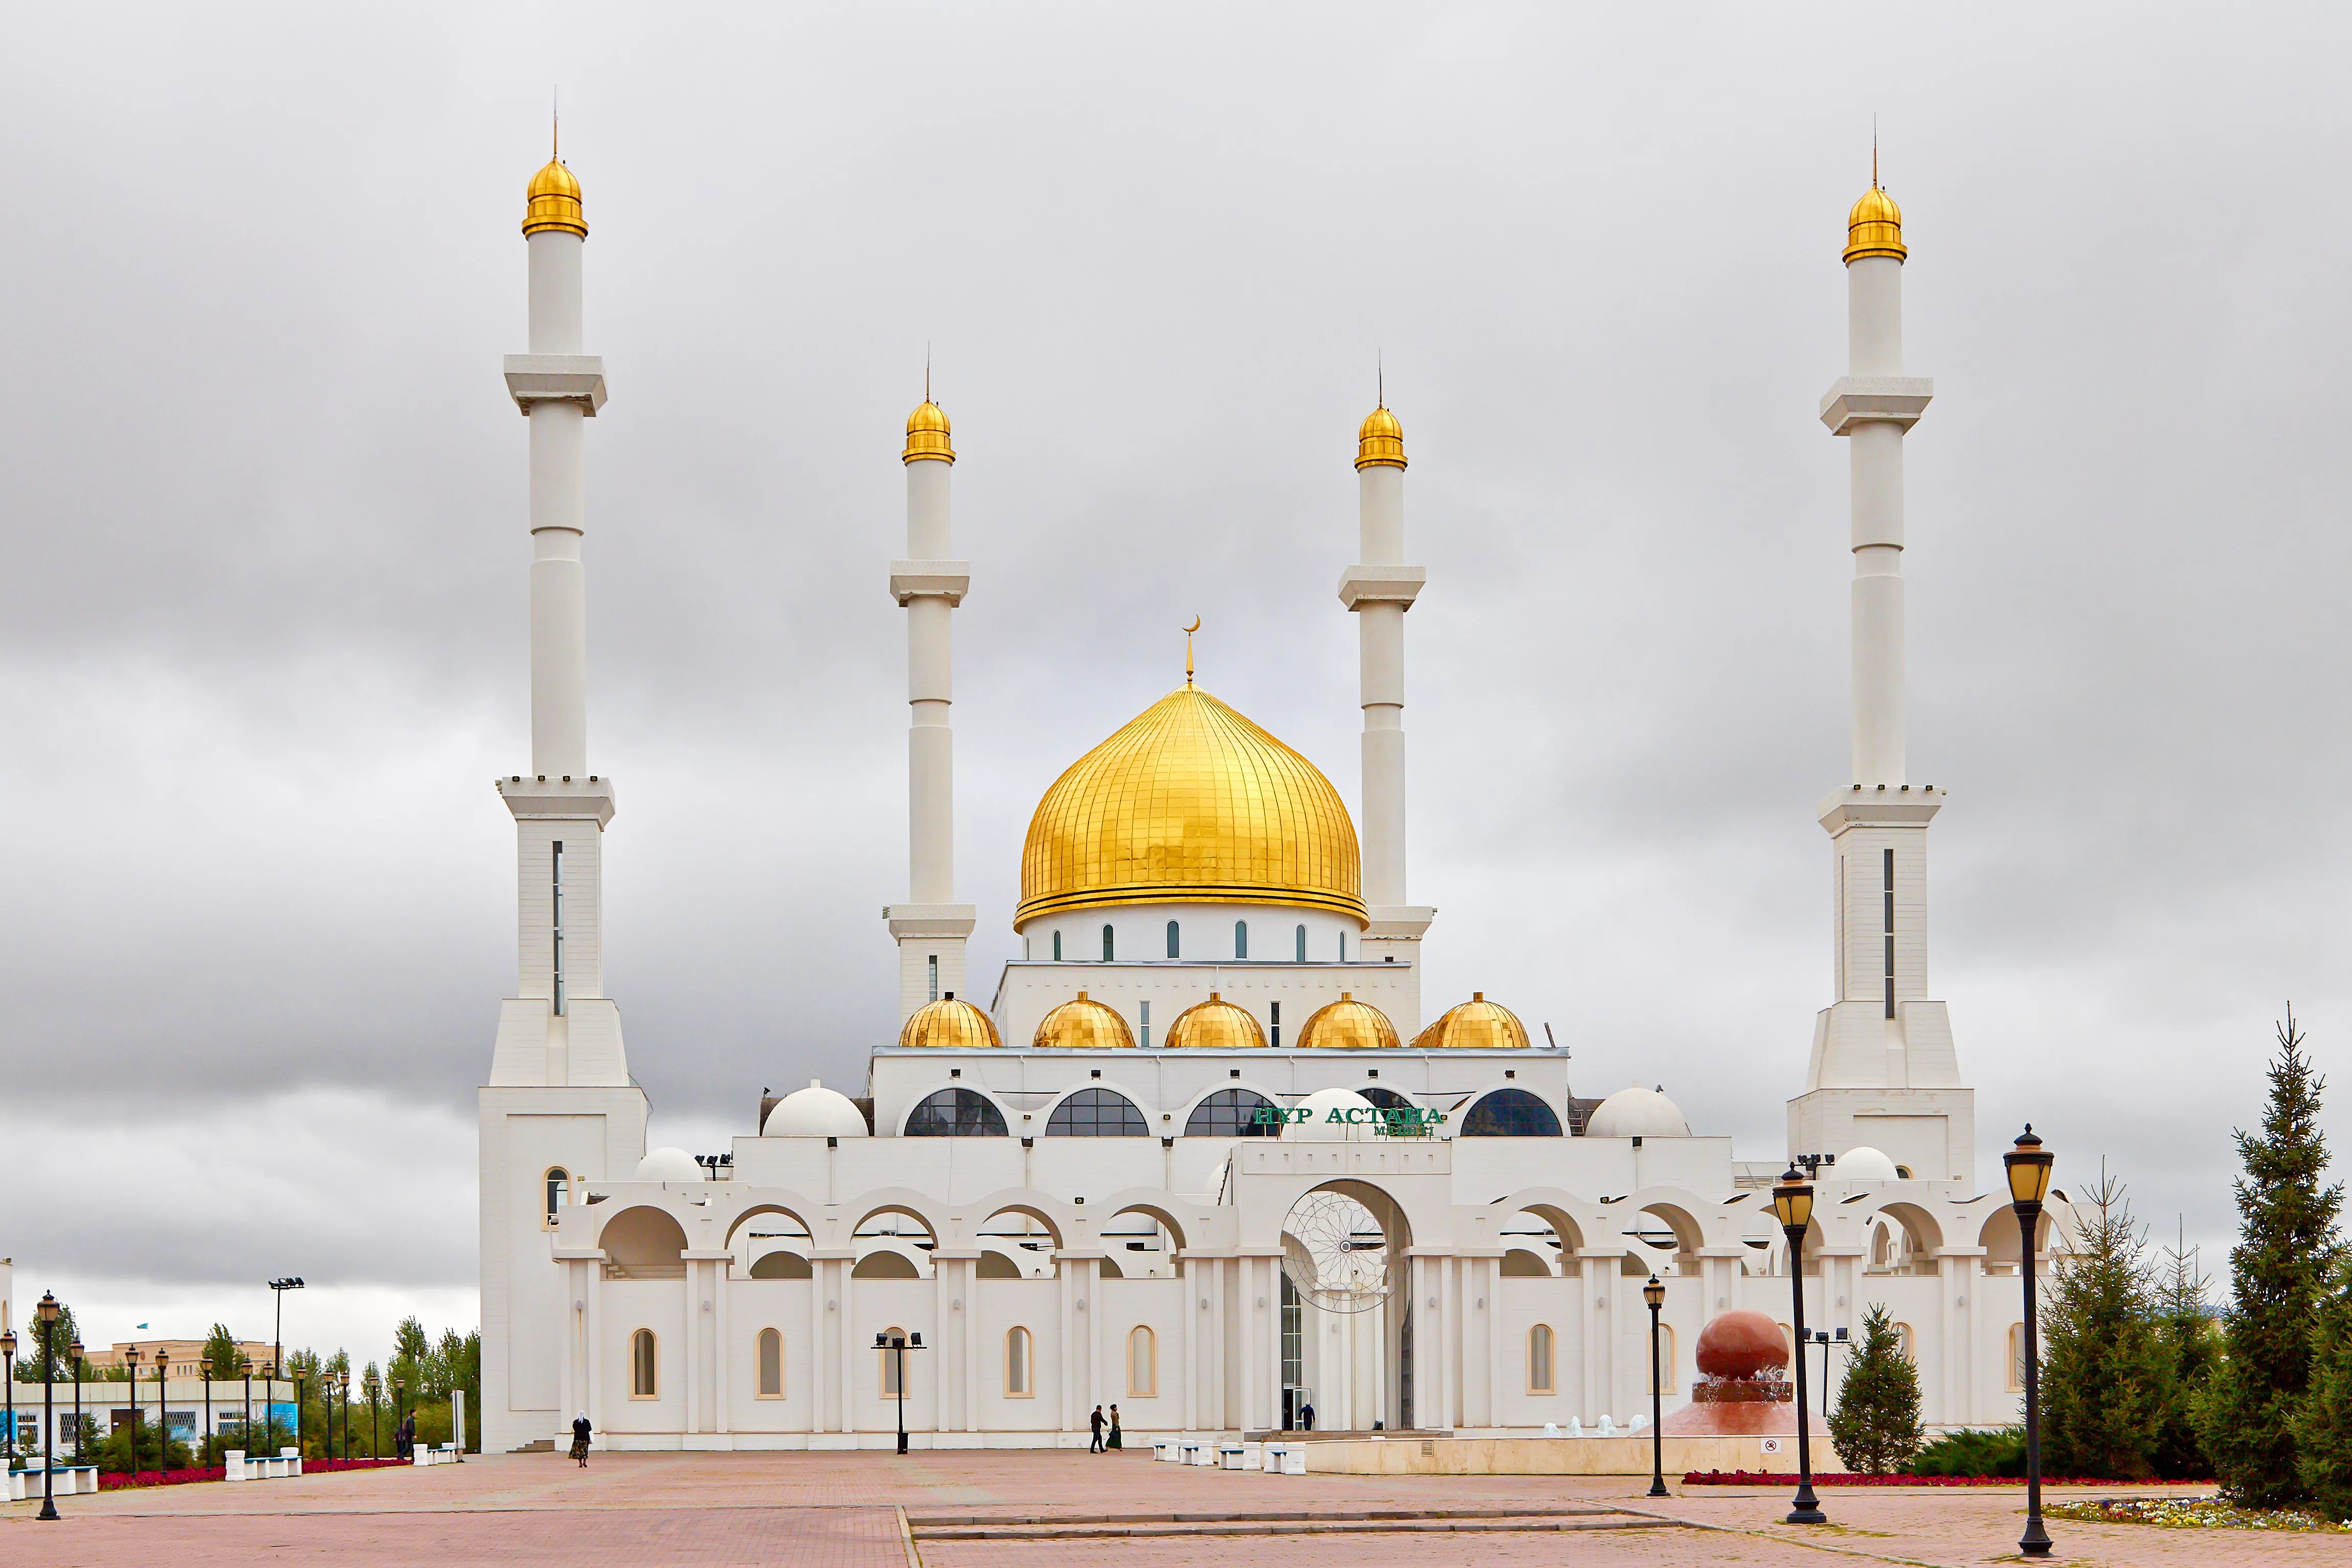 Nur Astana Mosque in Kazakhstan, Central Asia | Architecture - Rated 4